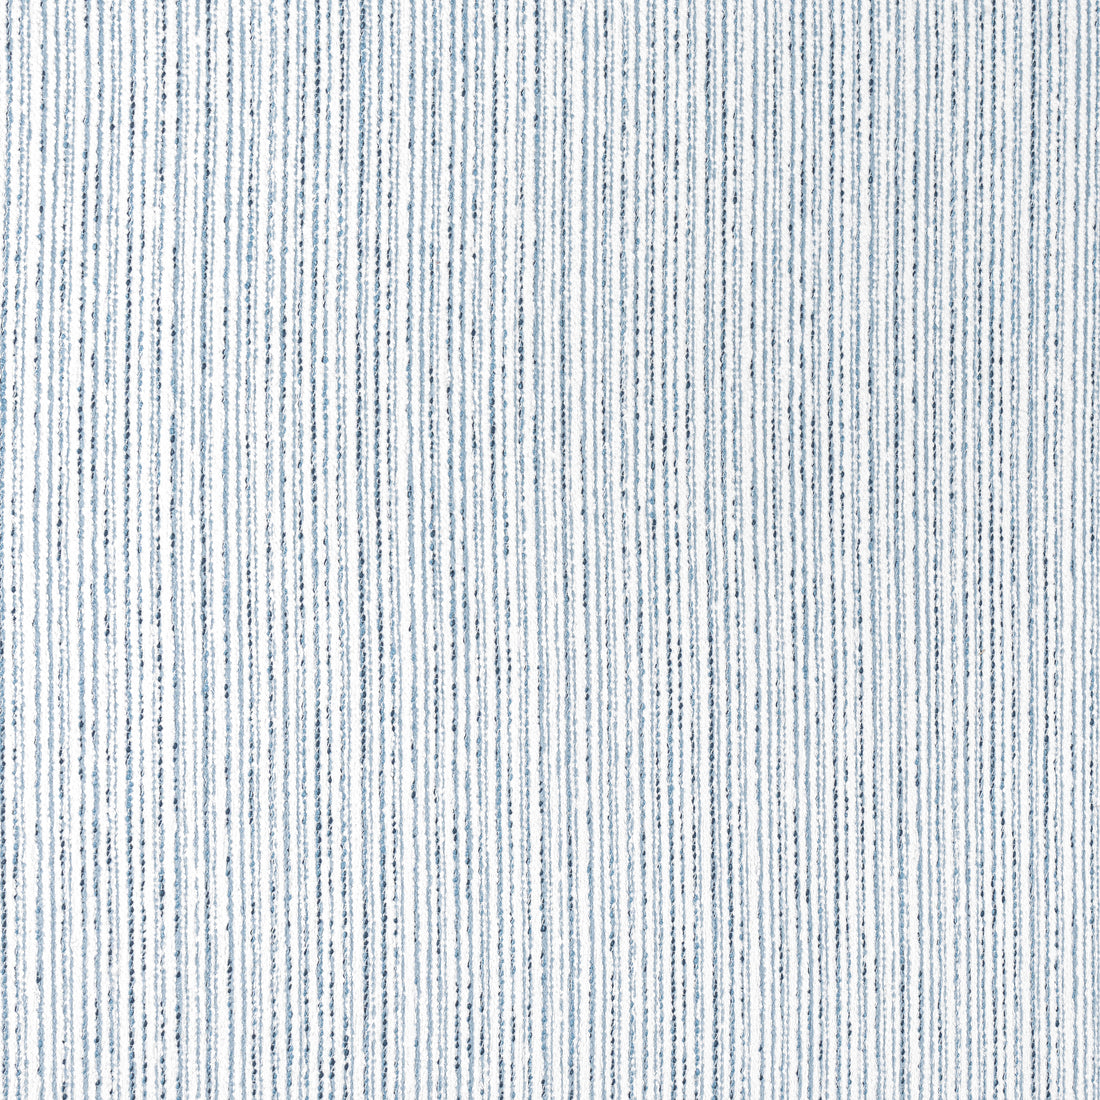 Zia Stripe fabric in sky color - pattern number W8806 - by Thibaut in the Haven collection